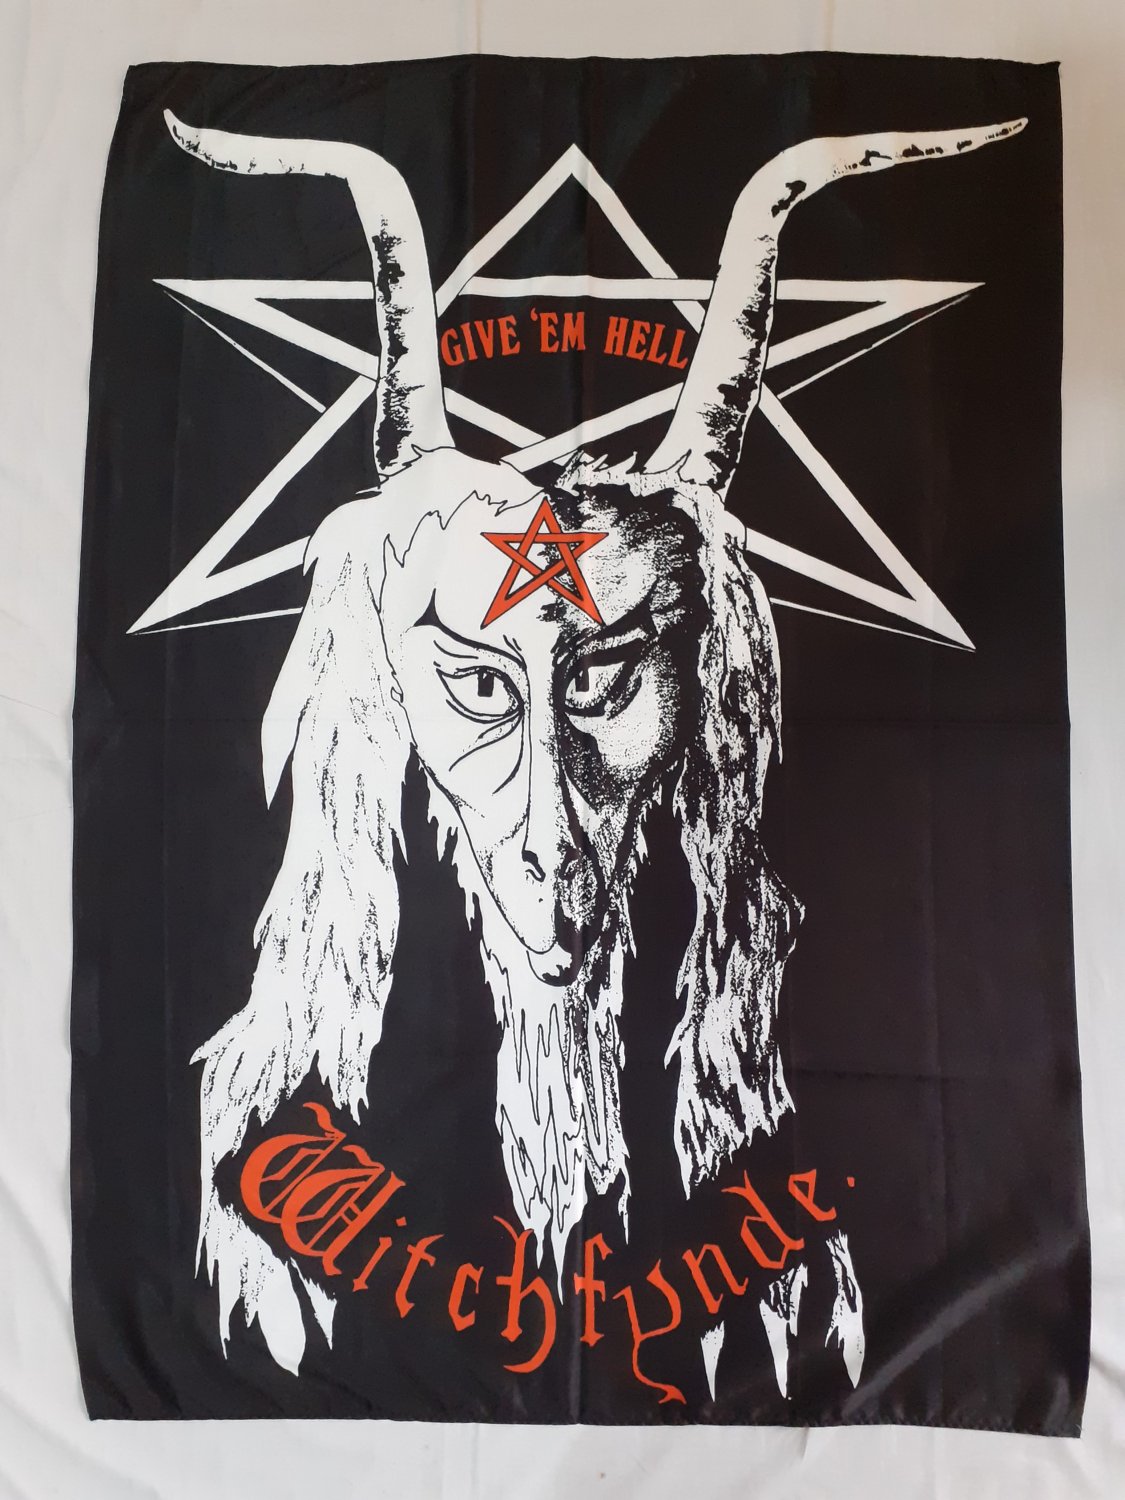 WITCHFYNDE - Give 'em hell FLAG Heavy metal cloth poster NWOBHM Angel witch Tokyo blade